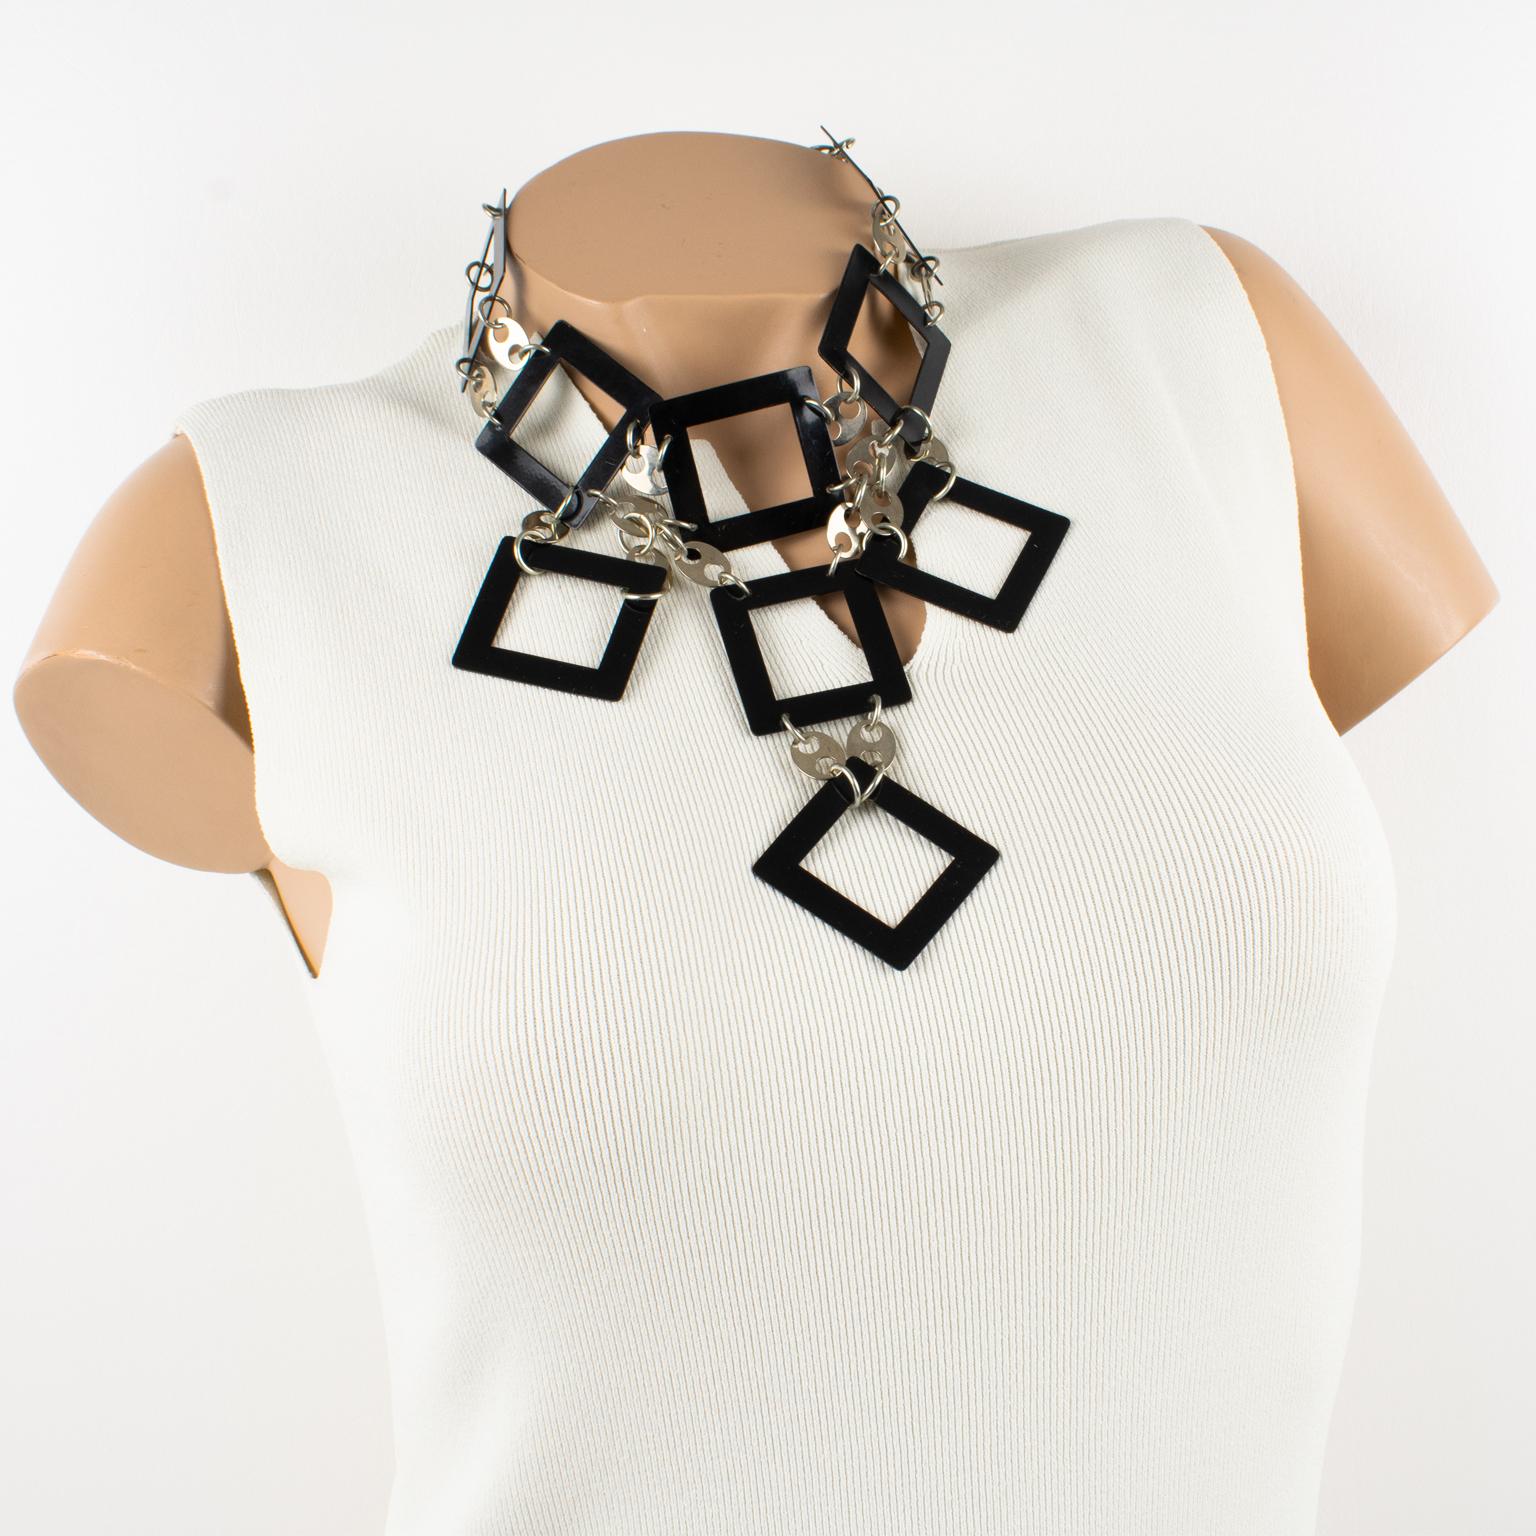 Paco Rabanne, Paris, designed this stunning geometric Space Age chocker necklace circa 1960. The piece features black enamel metal square elements built together and contrasted with chromed metal ovoid beads. The square elements' first raw forms a